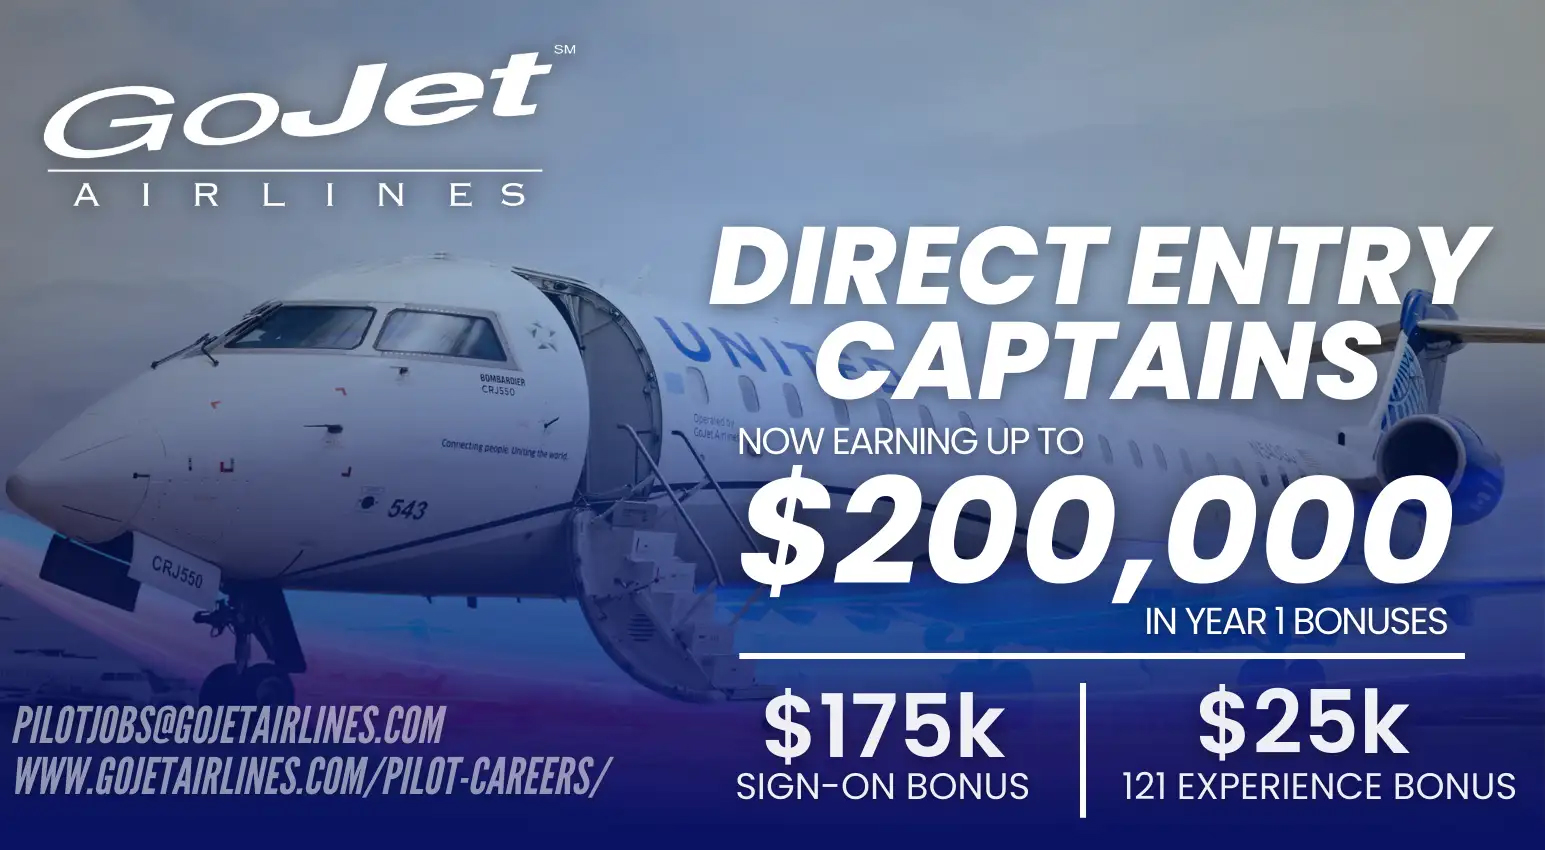 Direct Entry Captains now earn up to $200,000 in Total Bonuses